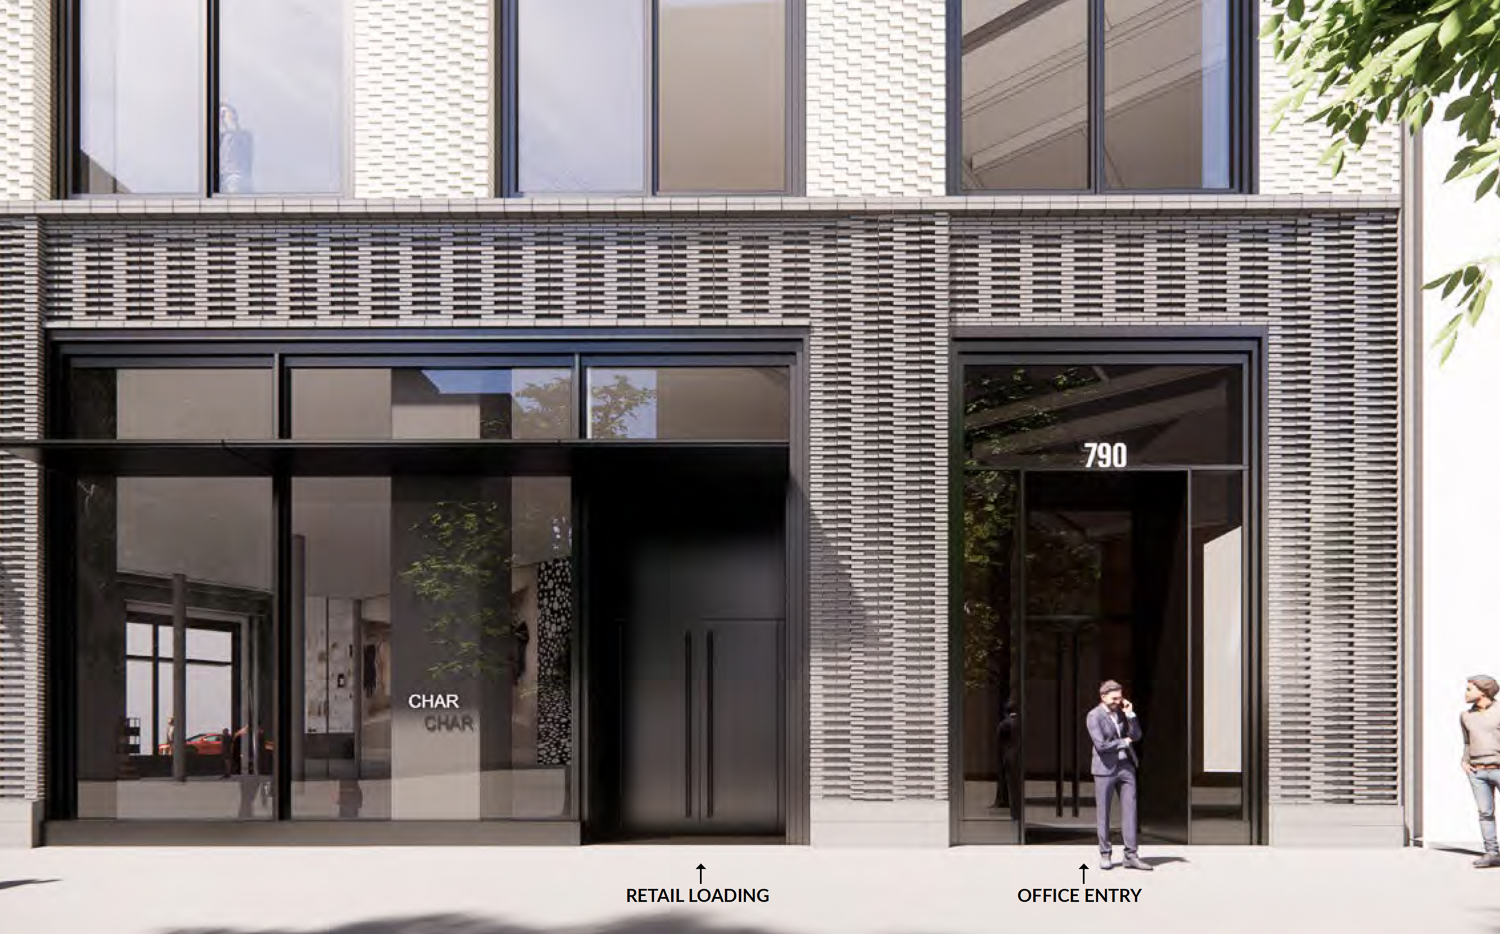 2 Stockton Street lobby entrance for the offices at 790 Market Street, rendering by Gensler